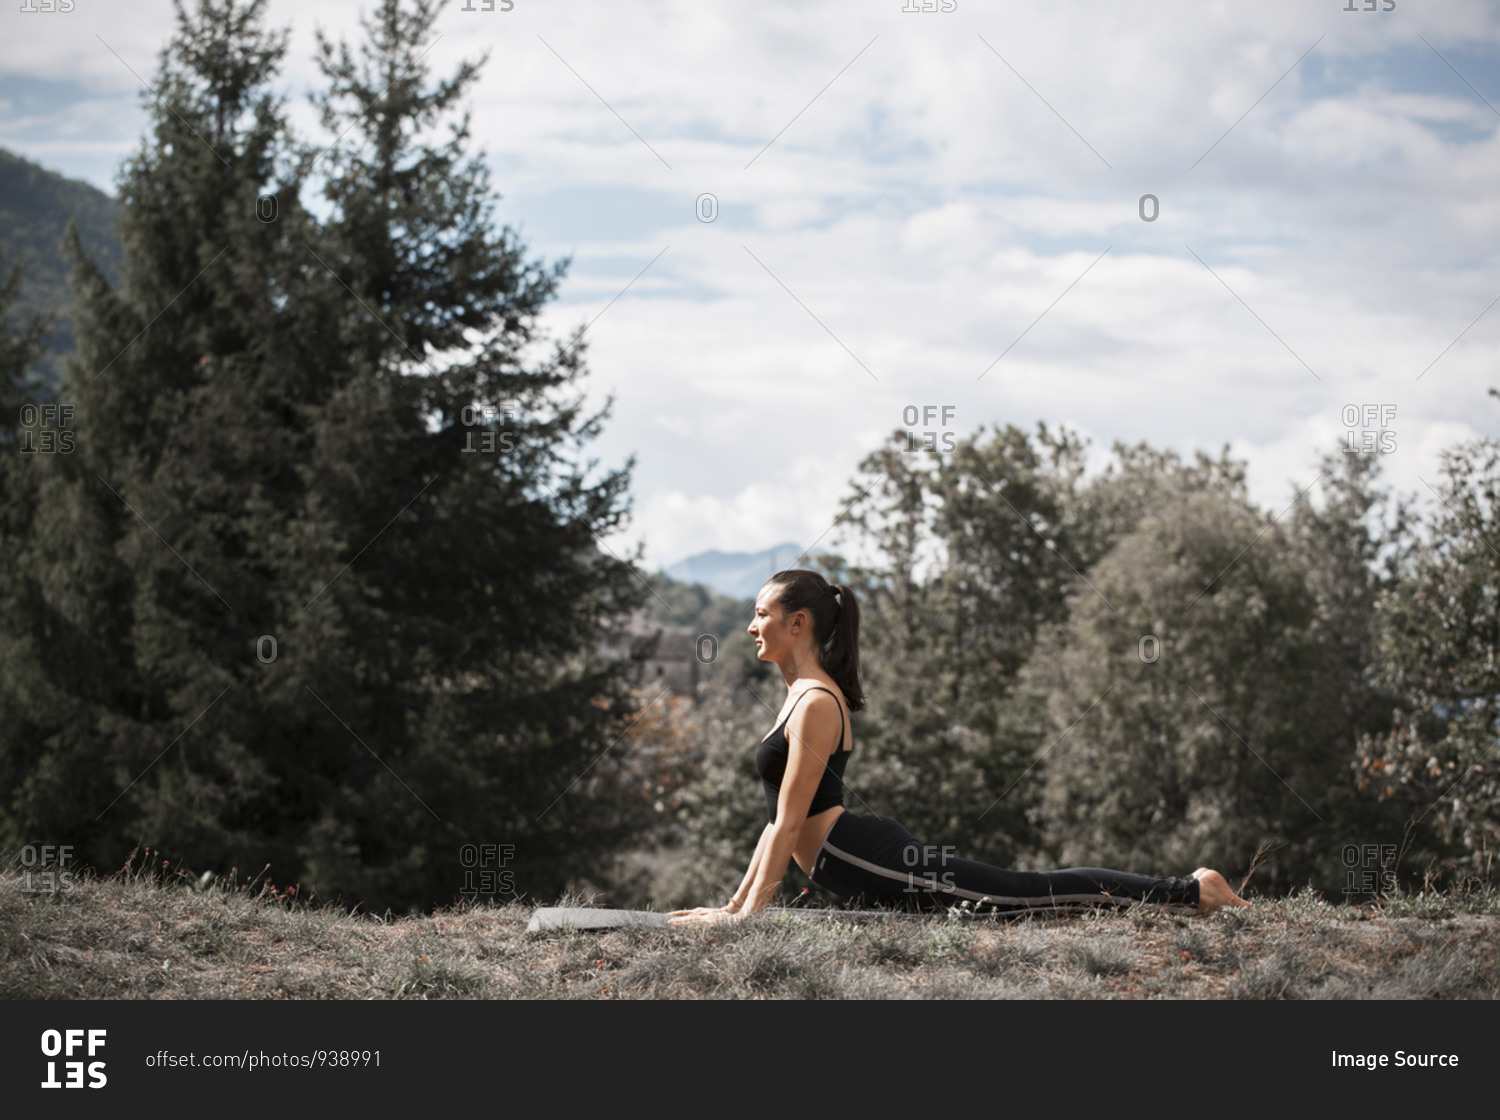 Woman practicing yoga, on yoga mat in rural landscape